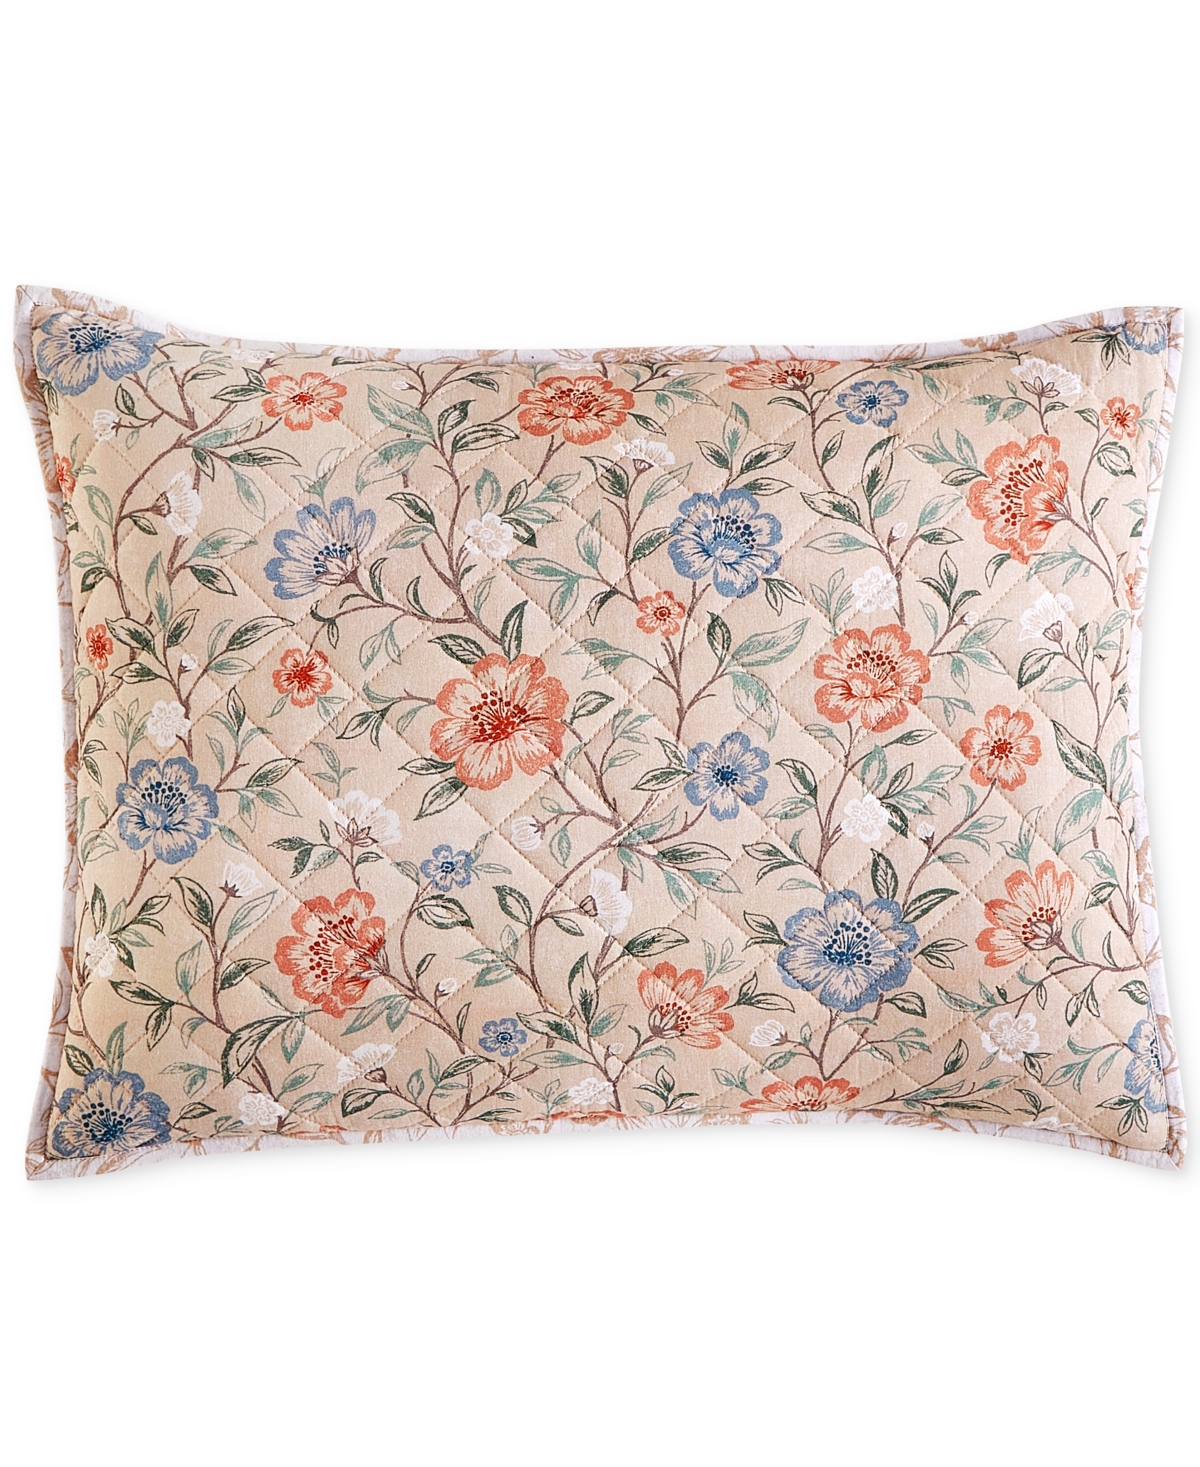 Charter Club Garden Floral Sham, Standard, Created For Macy's In Tan